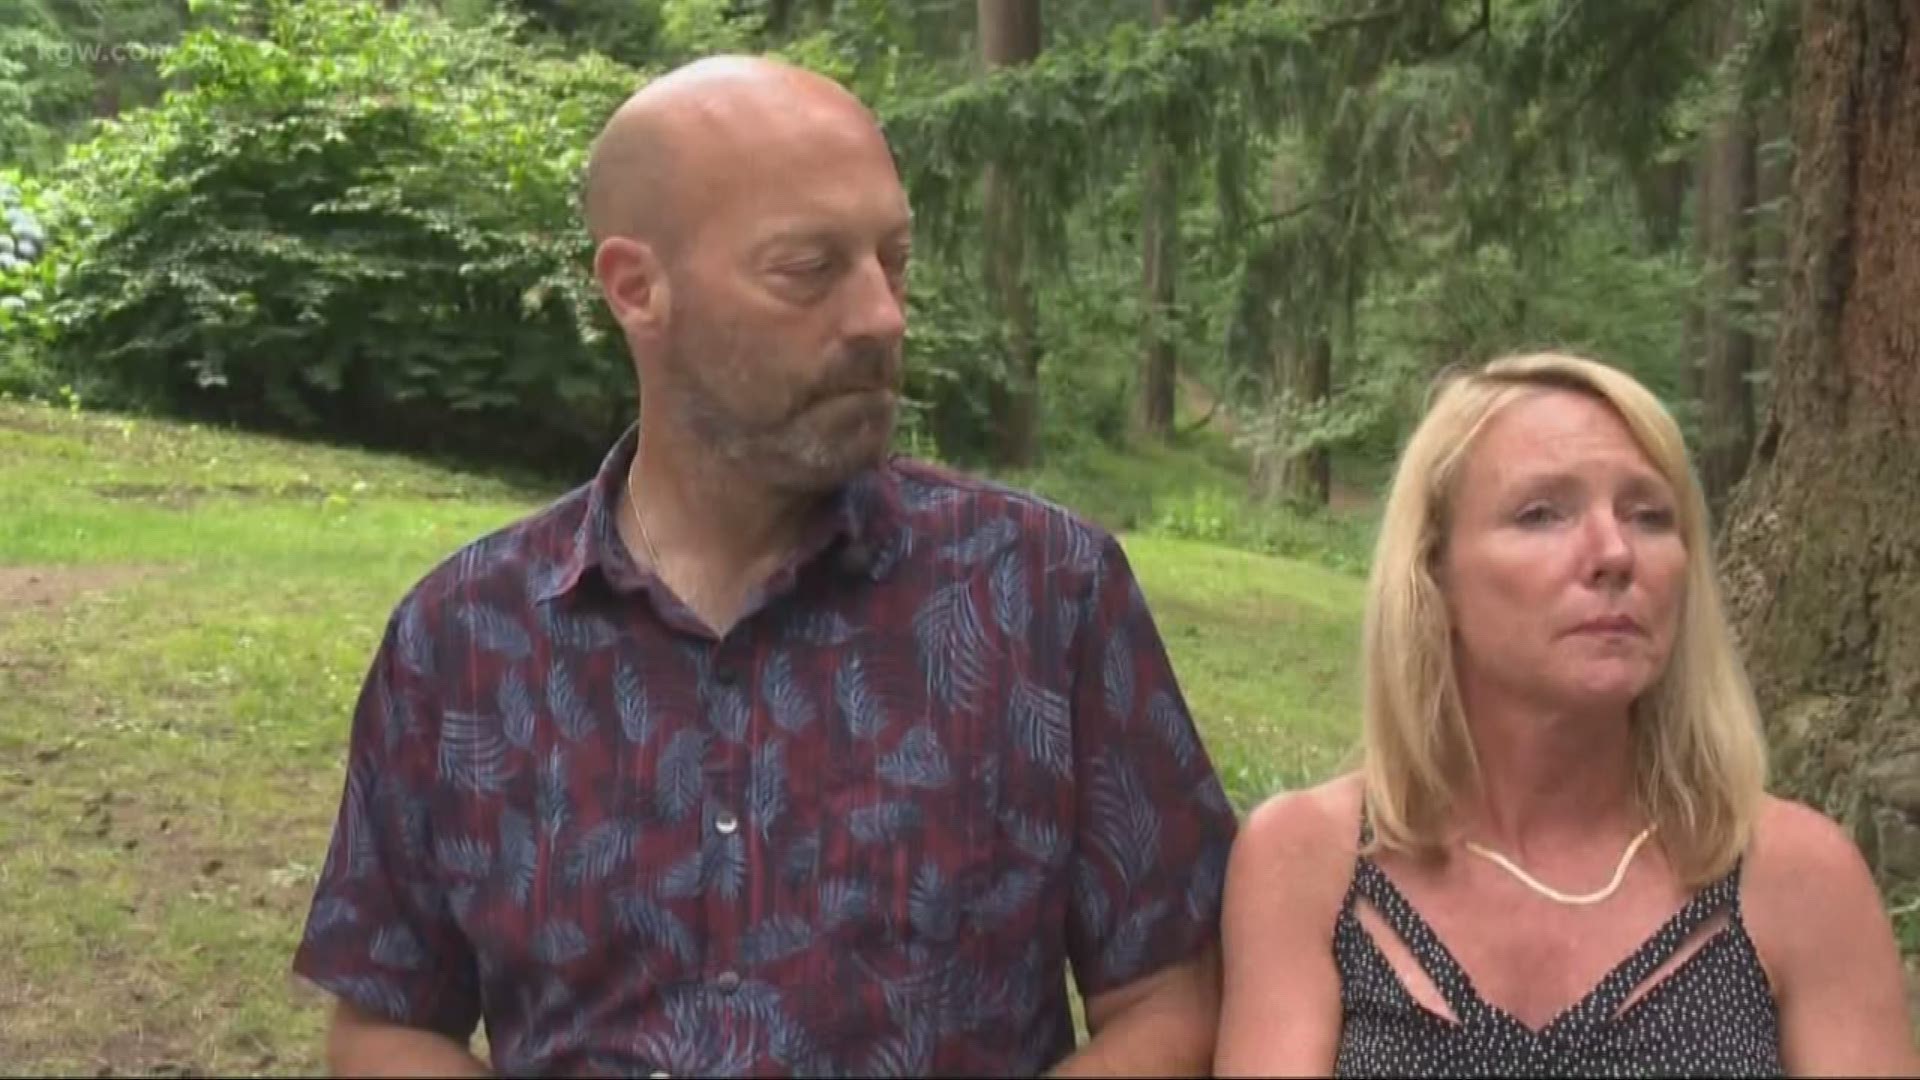 A couple who was attacked by a homeless man at Poet’s Beach has sued the city of Portland.